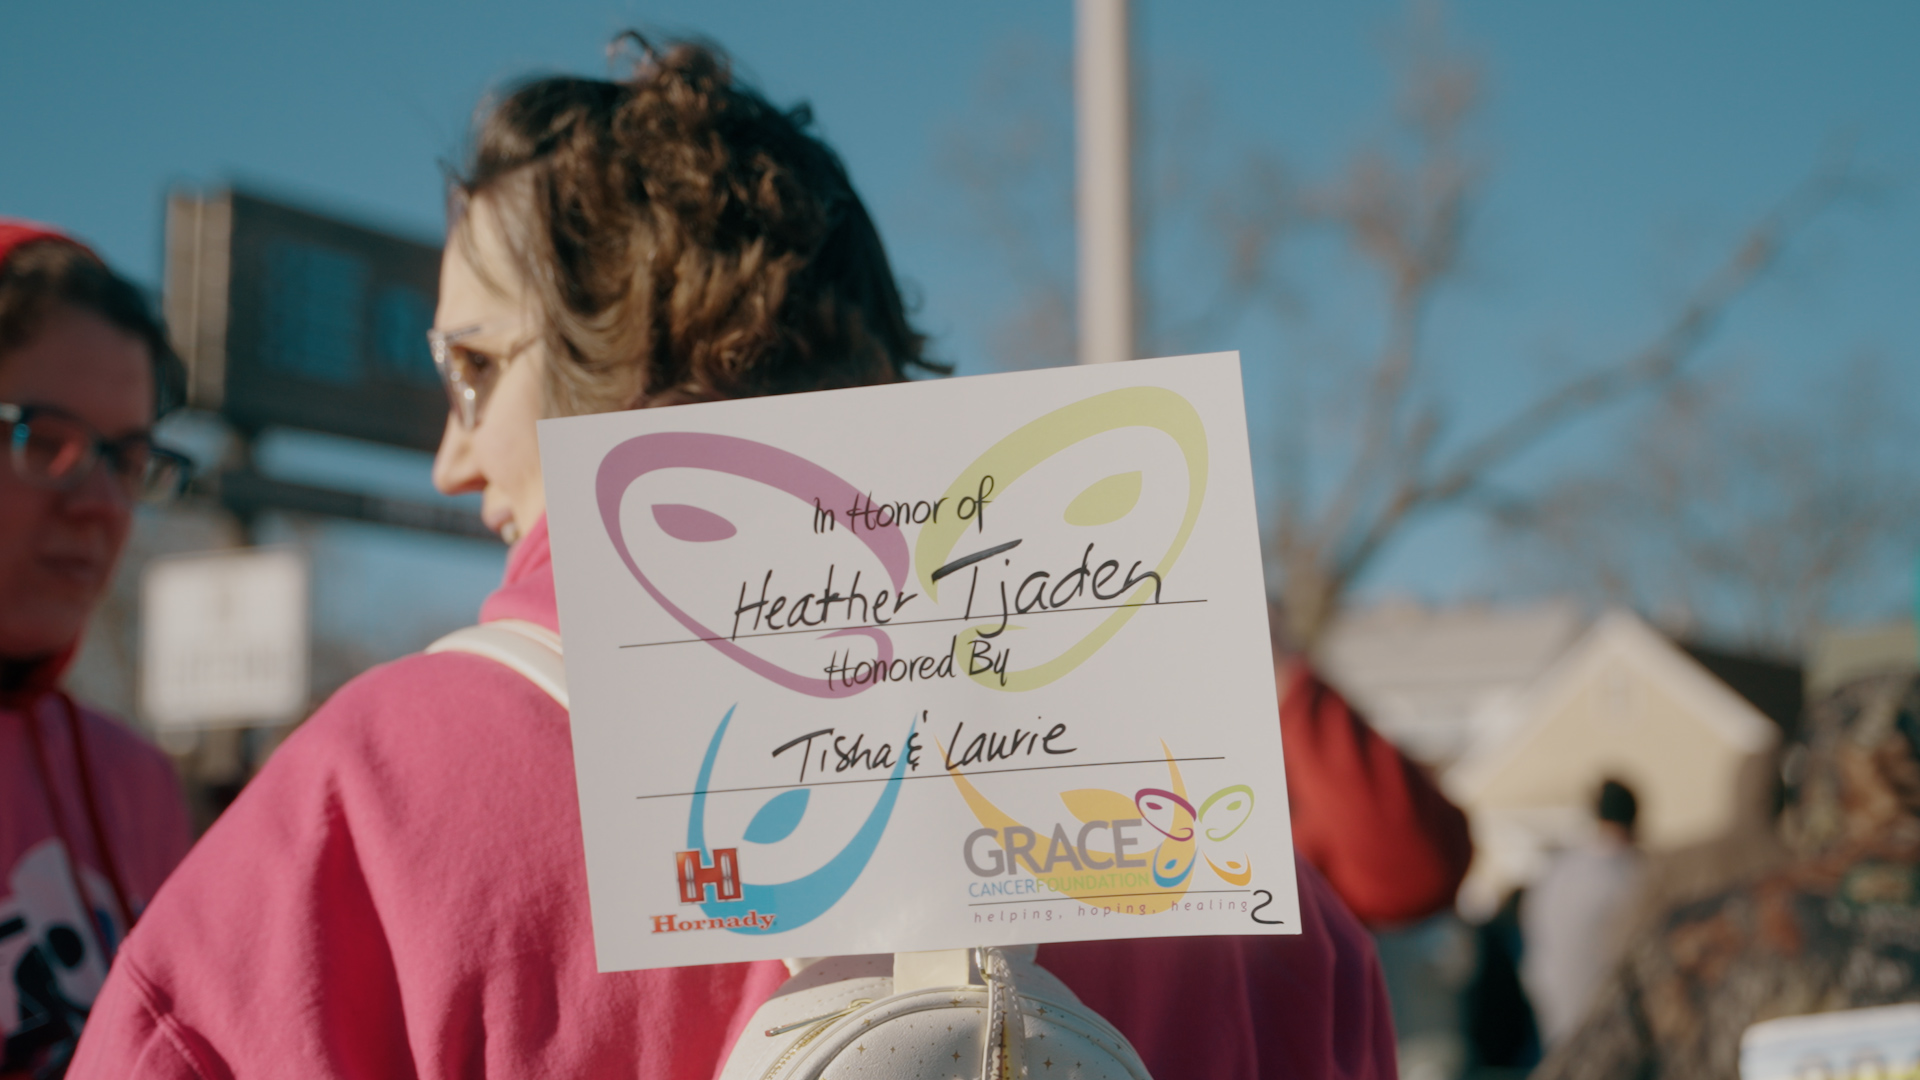 Heather at the RACE for GRACE event